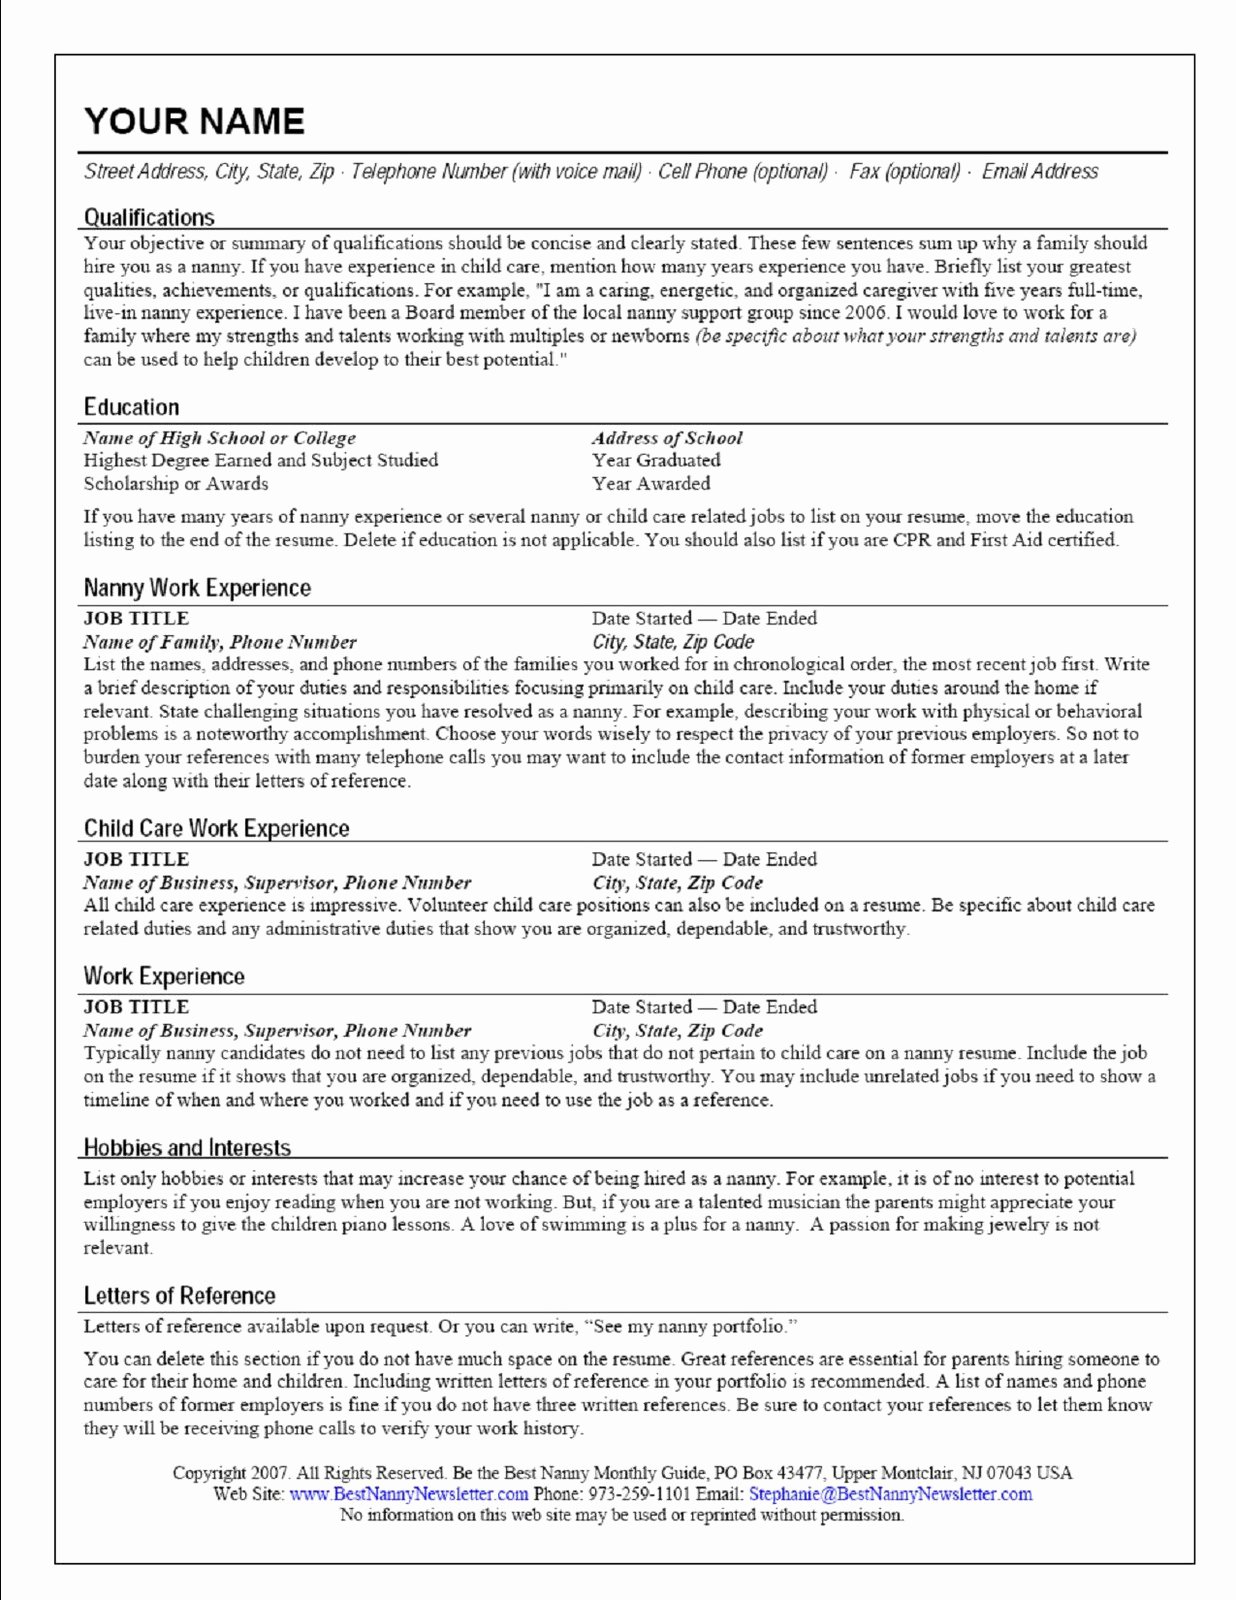 Examples Of Nanny Resumes Lovely How to Be the Best Nanny the Standout Nanny Resume